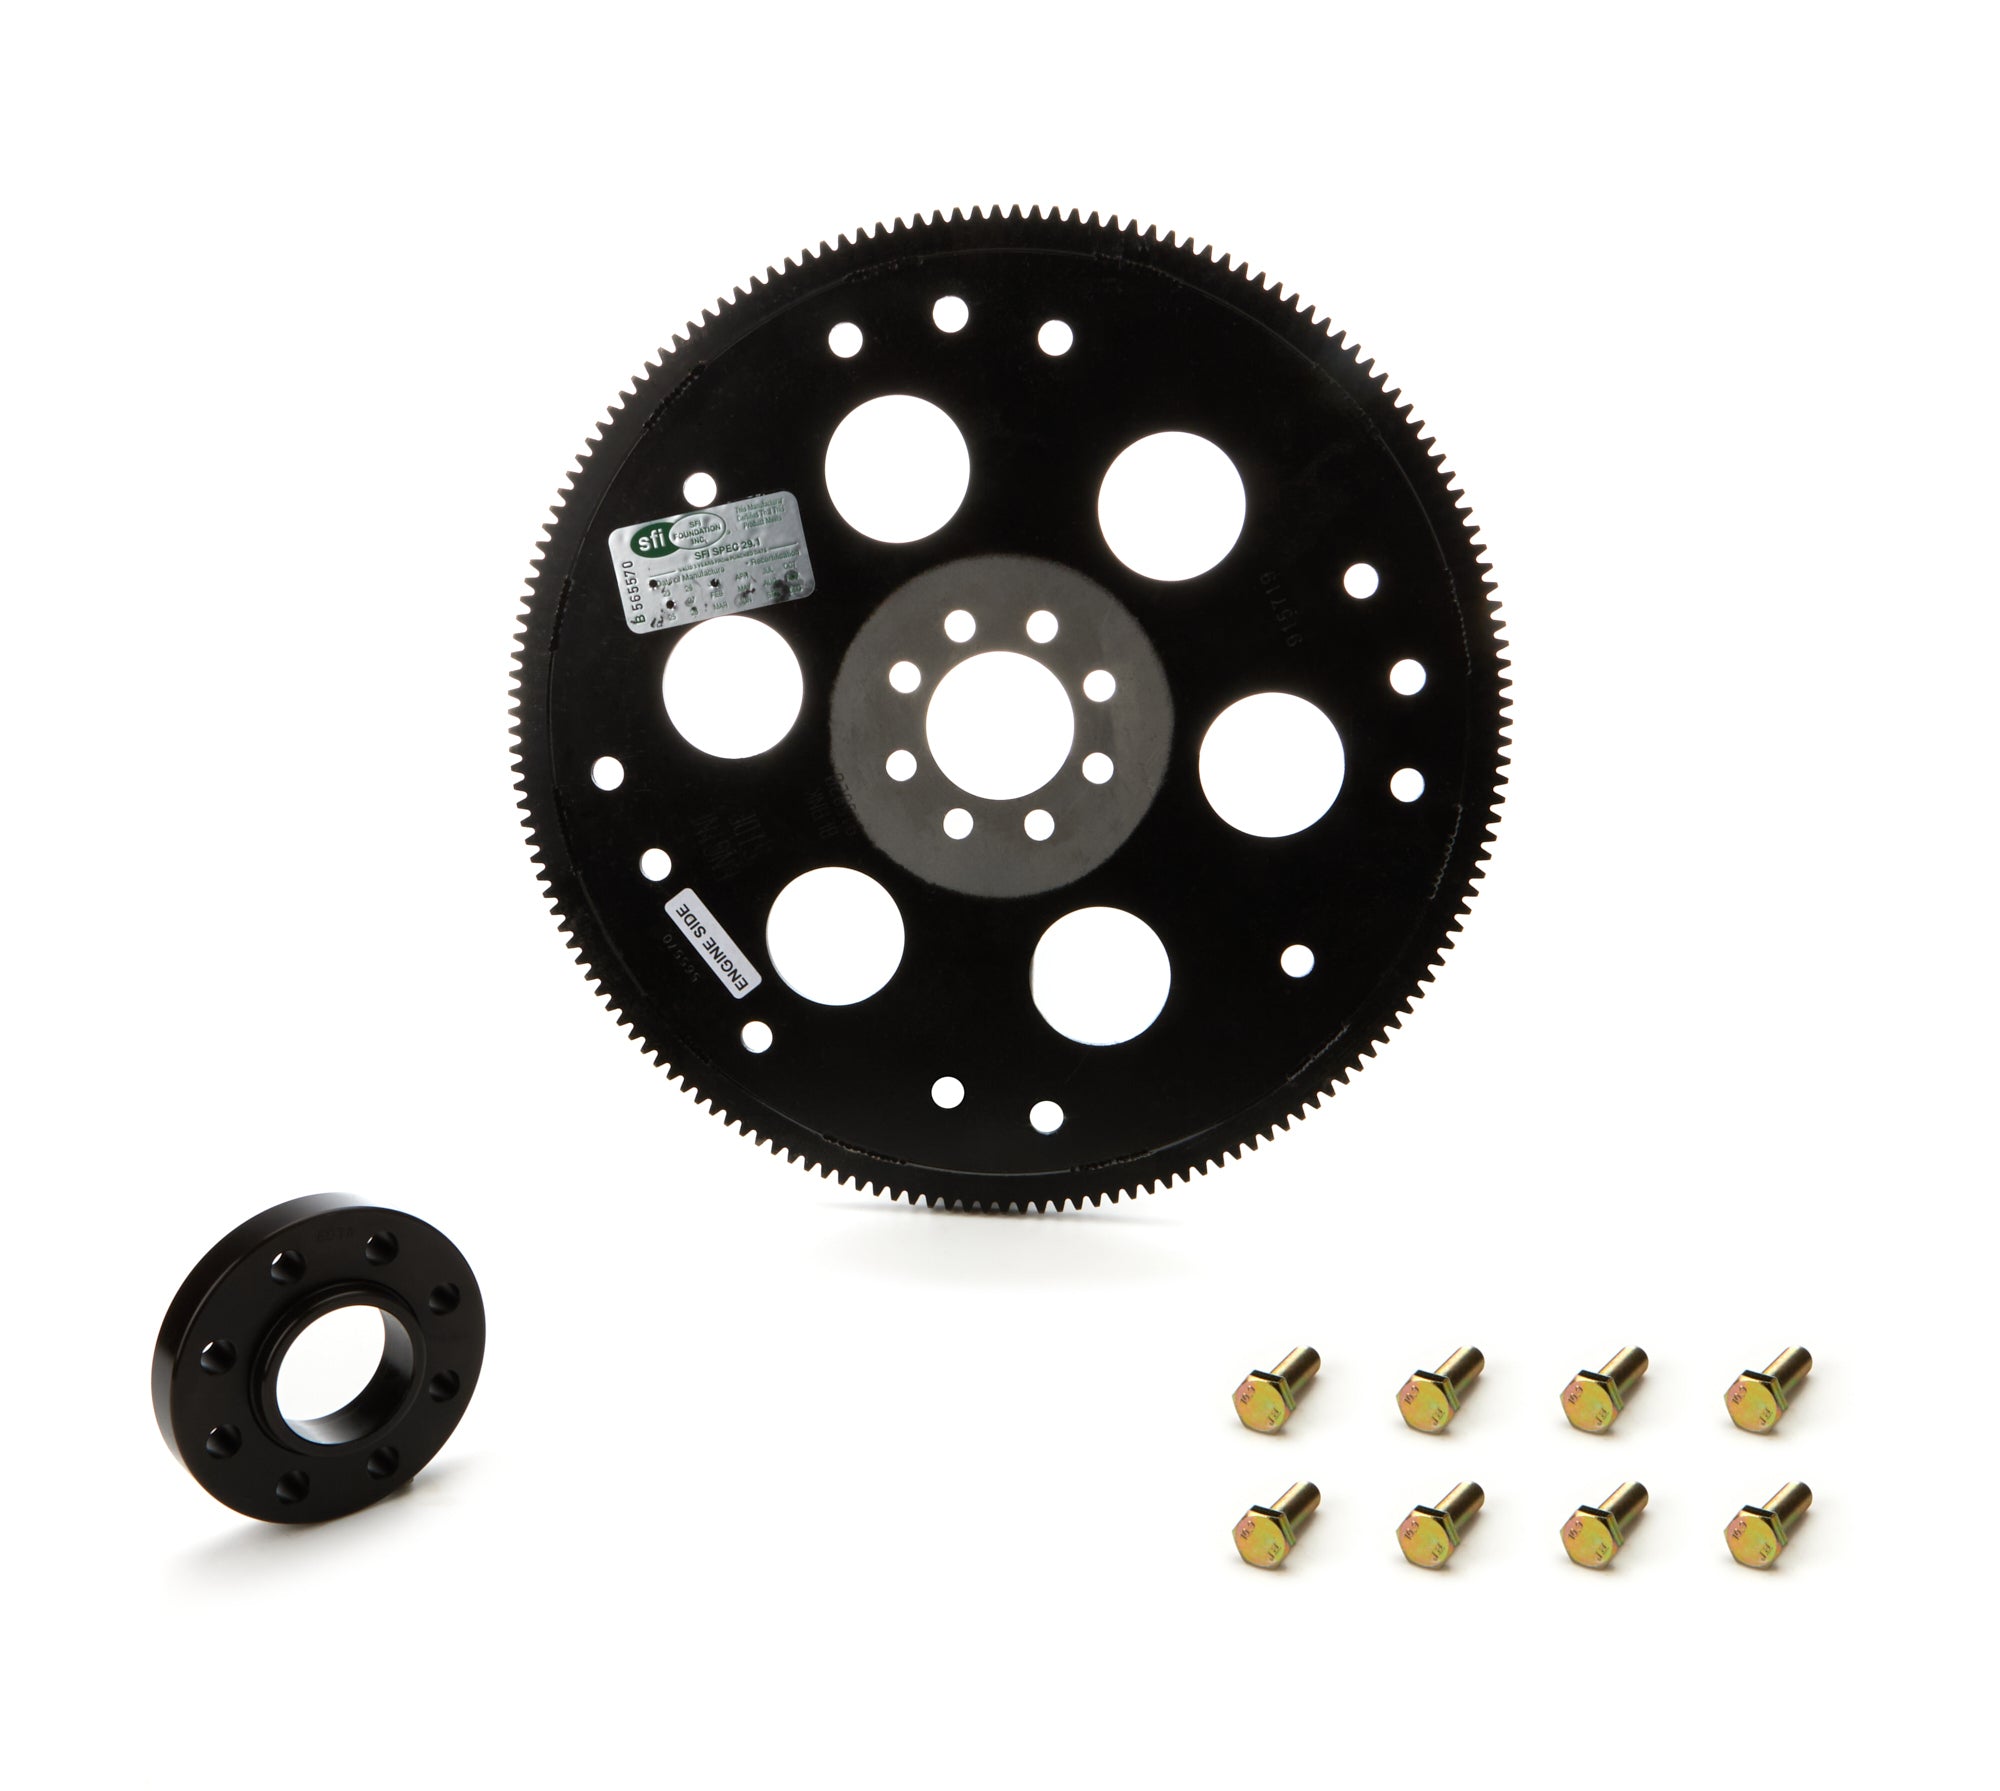 ATI Performance Products Flexplate Kit Ford 5.0L Coyote 8-Bolt 164 Tooth Automatic Transmissions and Components Flexplates and Components main image